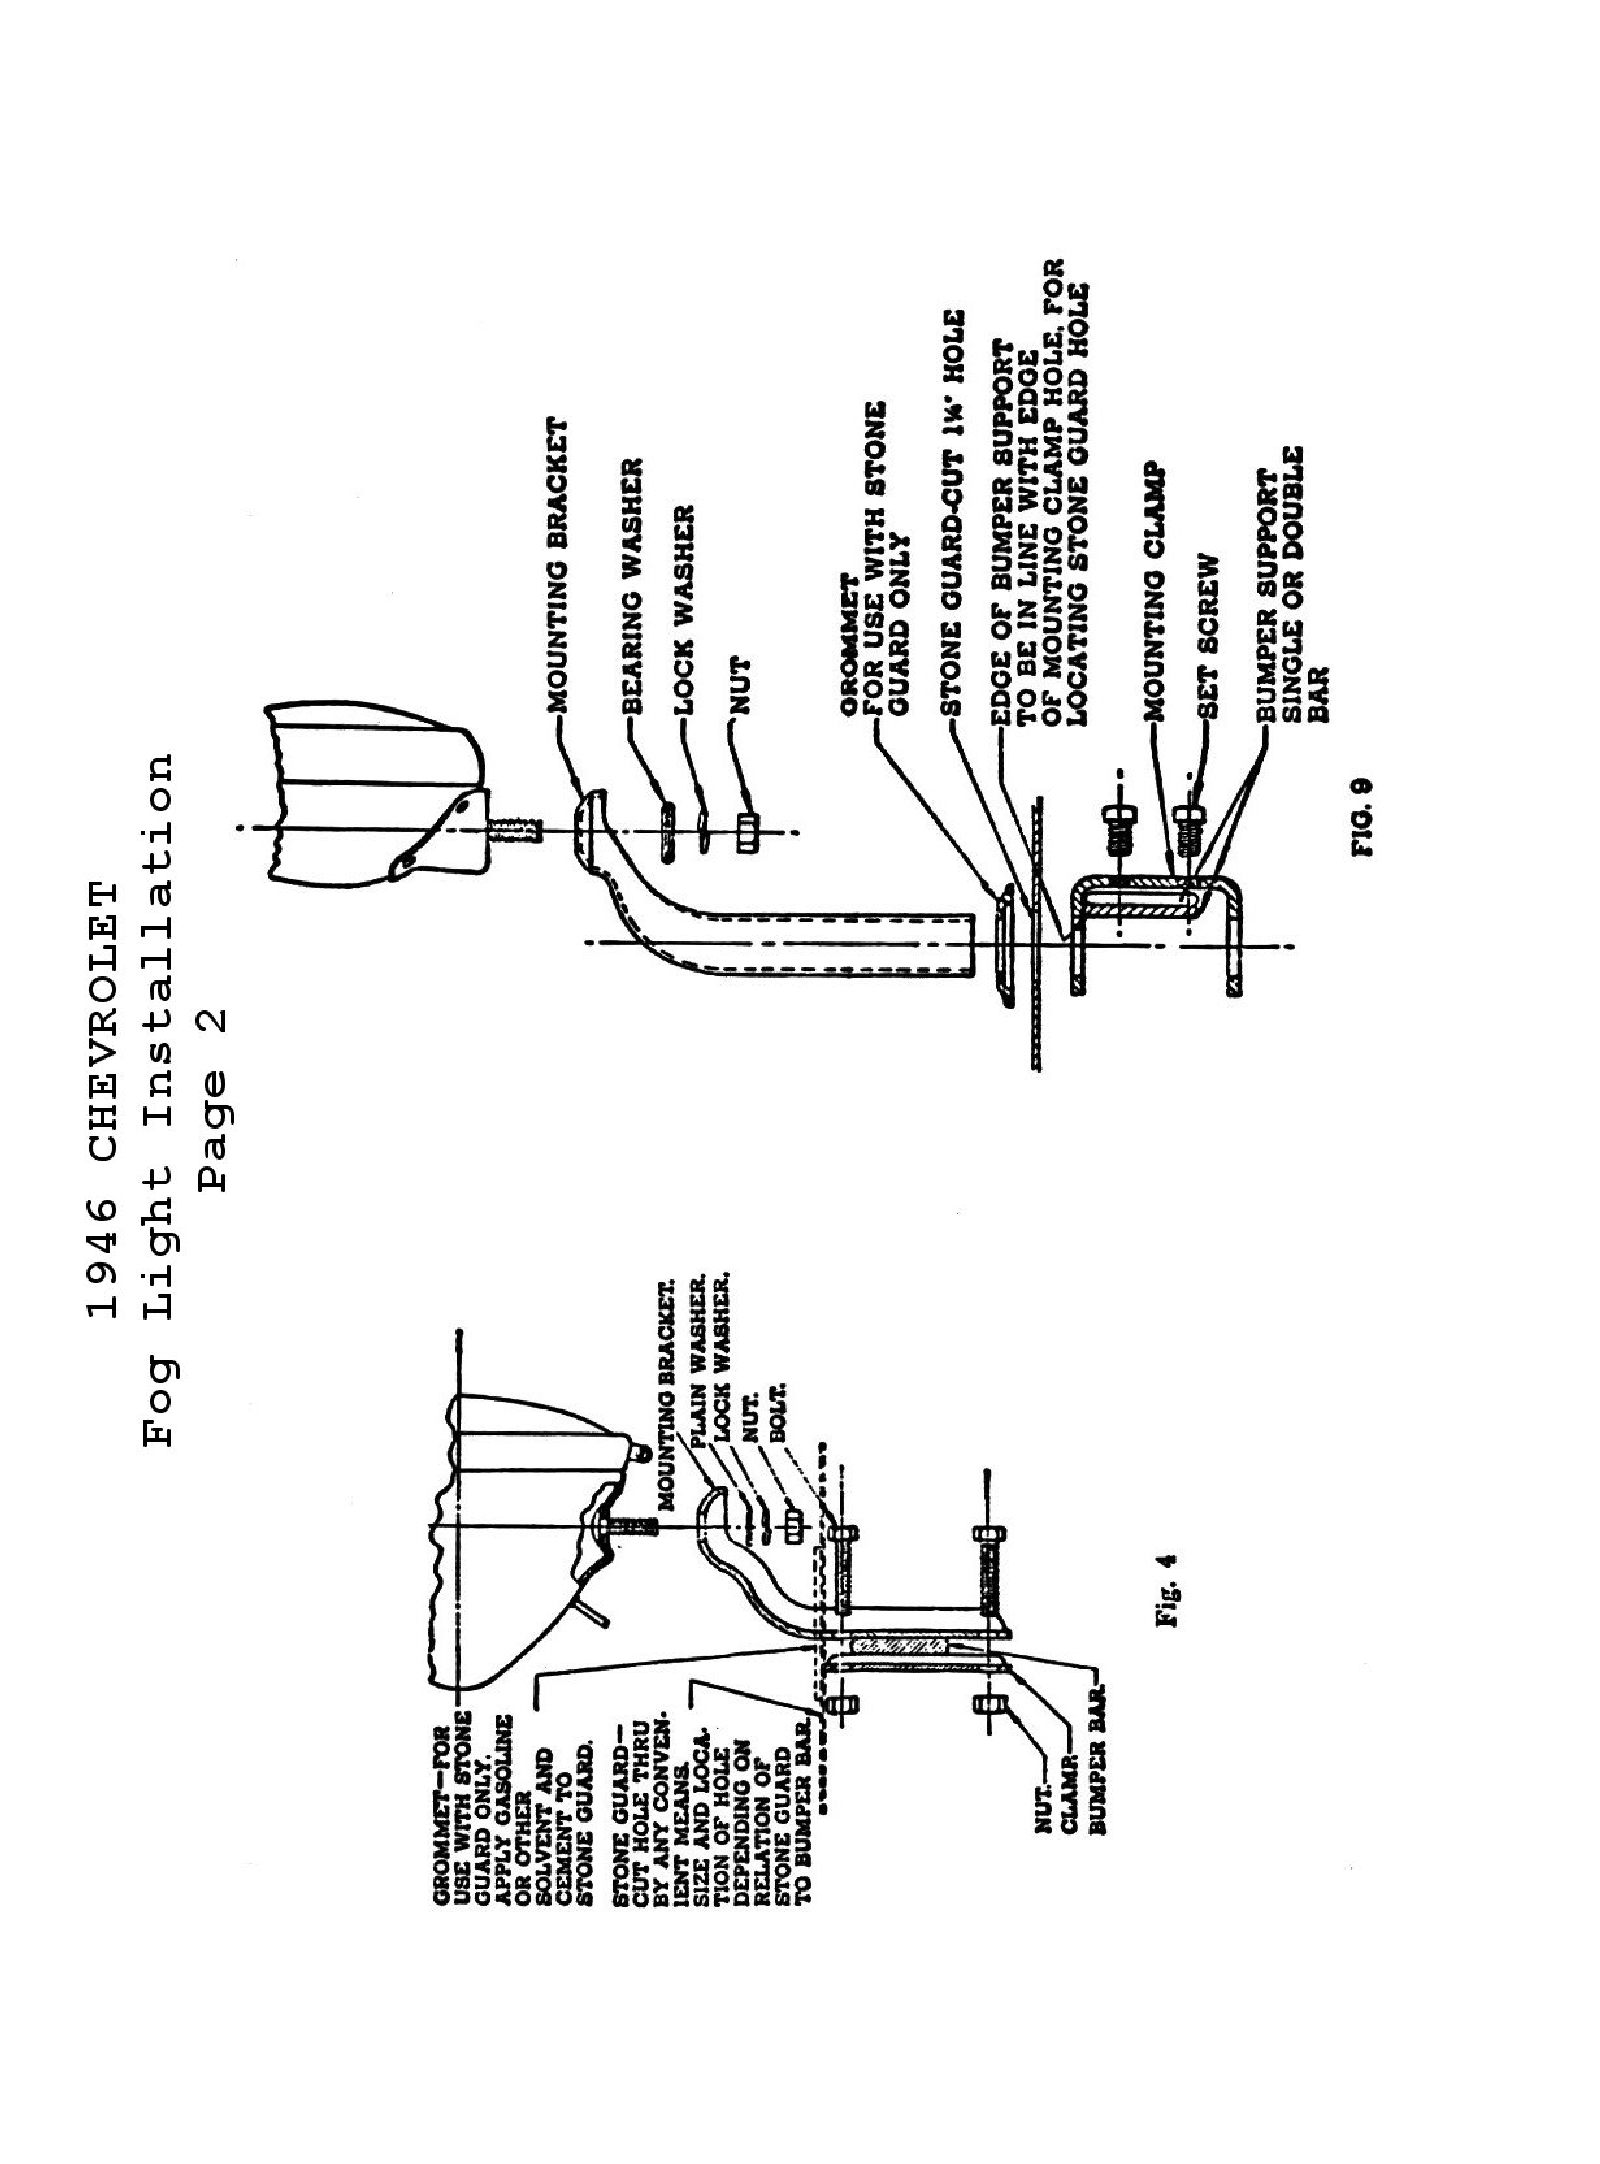 99 04 Mustang Fog Light Wiring Diagram from chevy.oldcarmanualproject.com